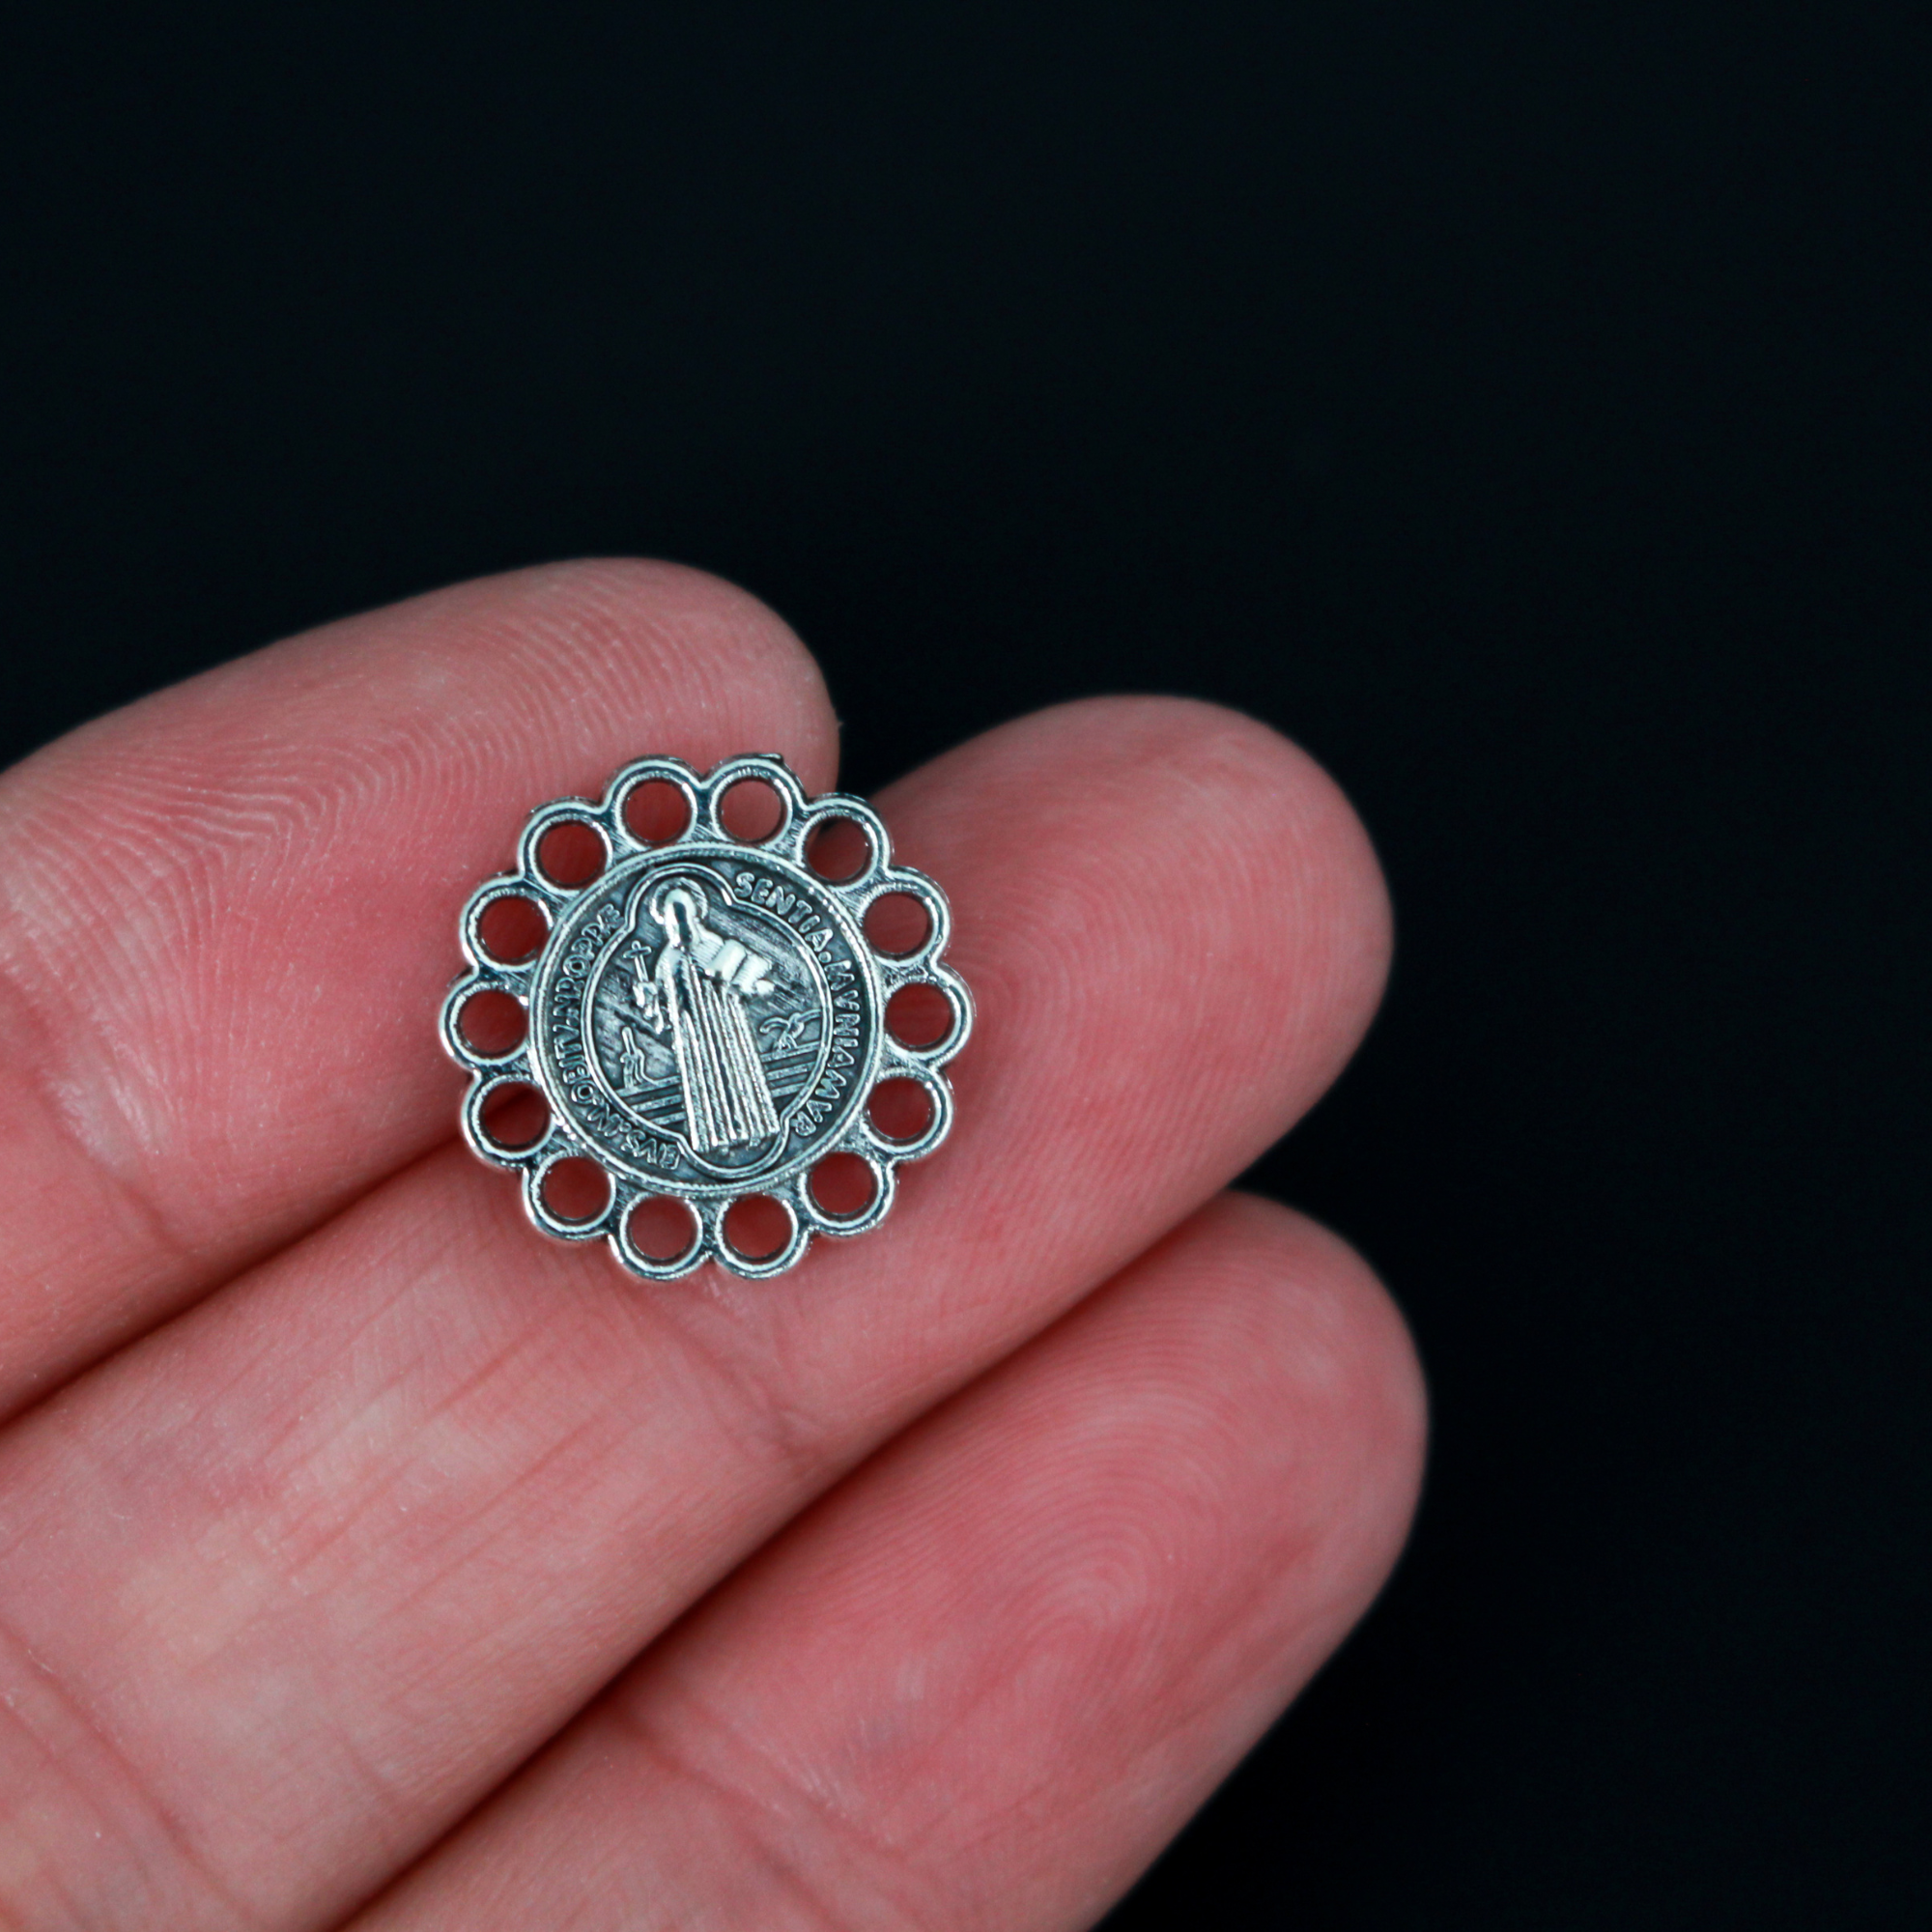 15mm St. Benedict charms. The edge of the charm is made up of circles so you can use this as a charm, a rosary centerpiece, bracelet links, etc